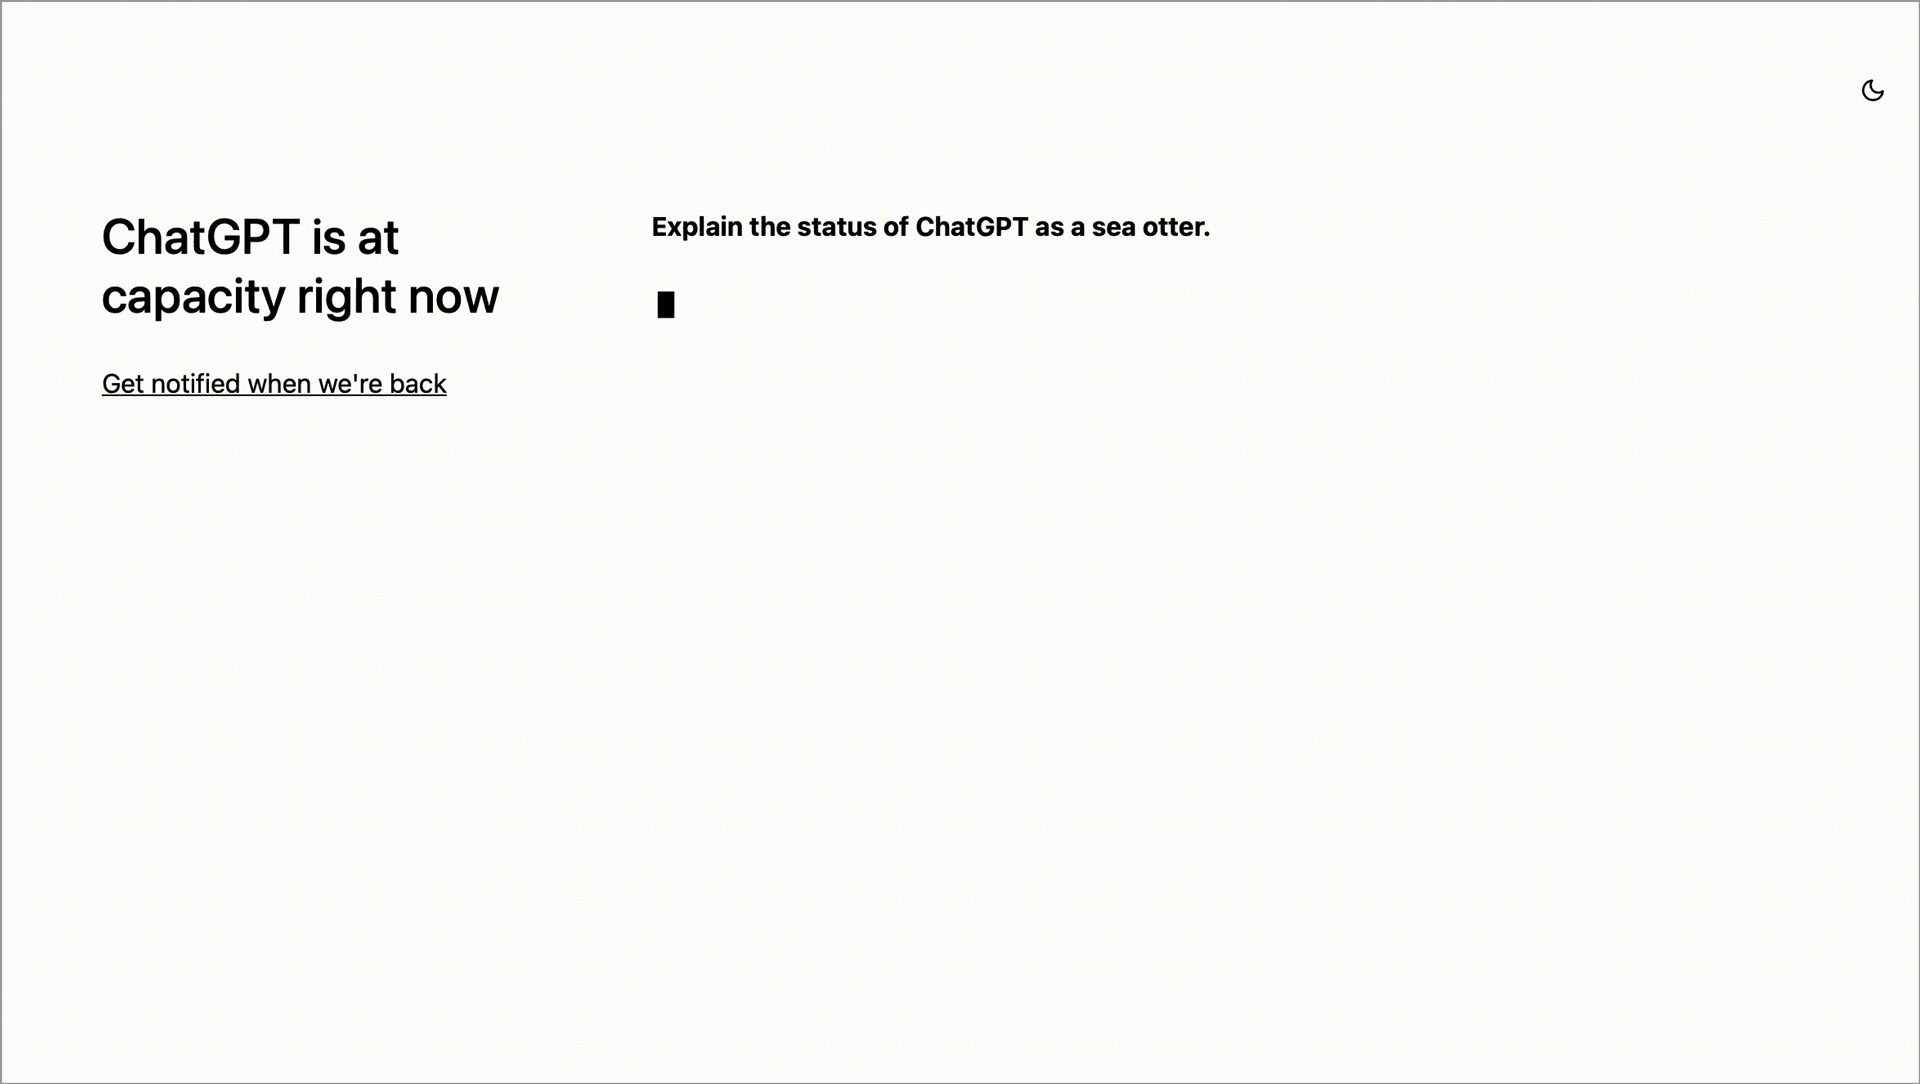 Animated GIF of ChatGPT writing out its response to the prompt "Explain the status of ChatGPT as a sea otter."